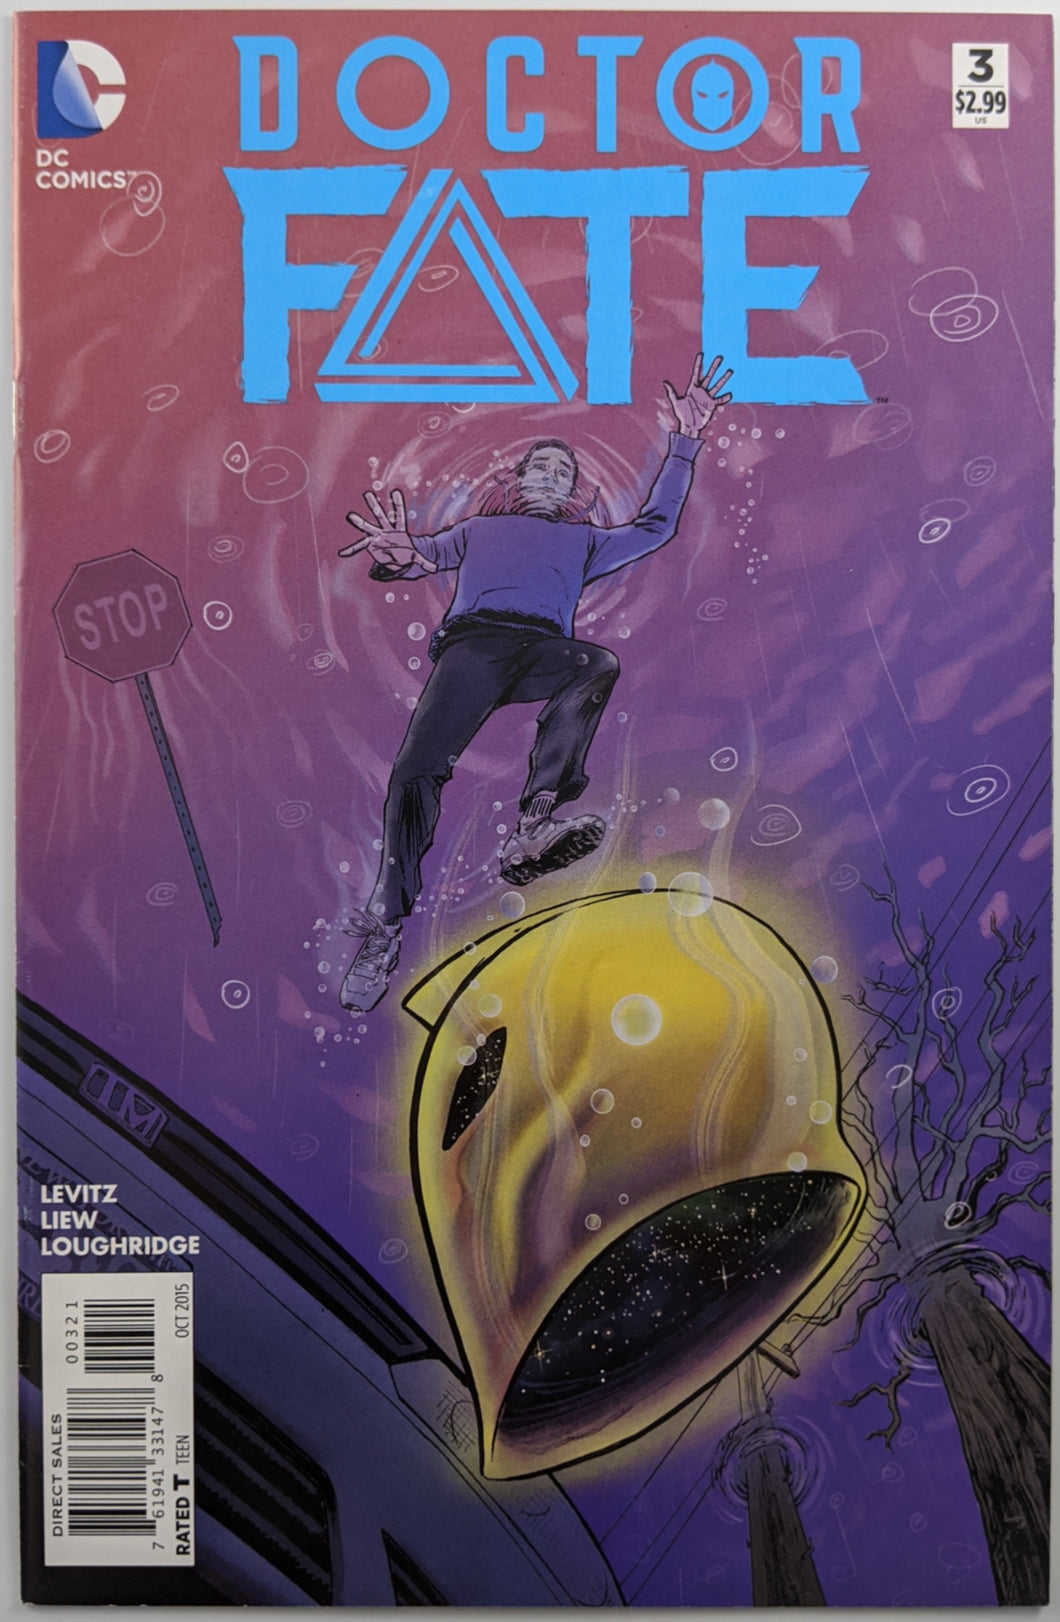 Doctor Fate (2015) #3 (Variant Cover)